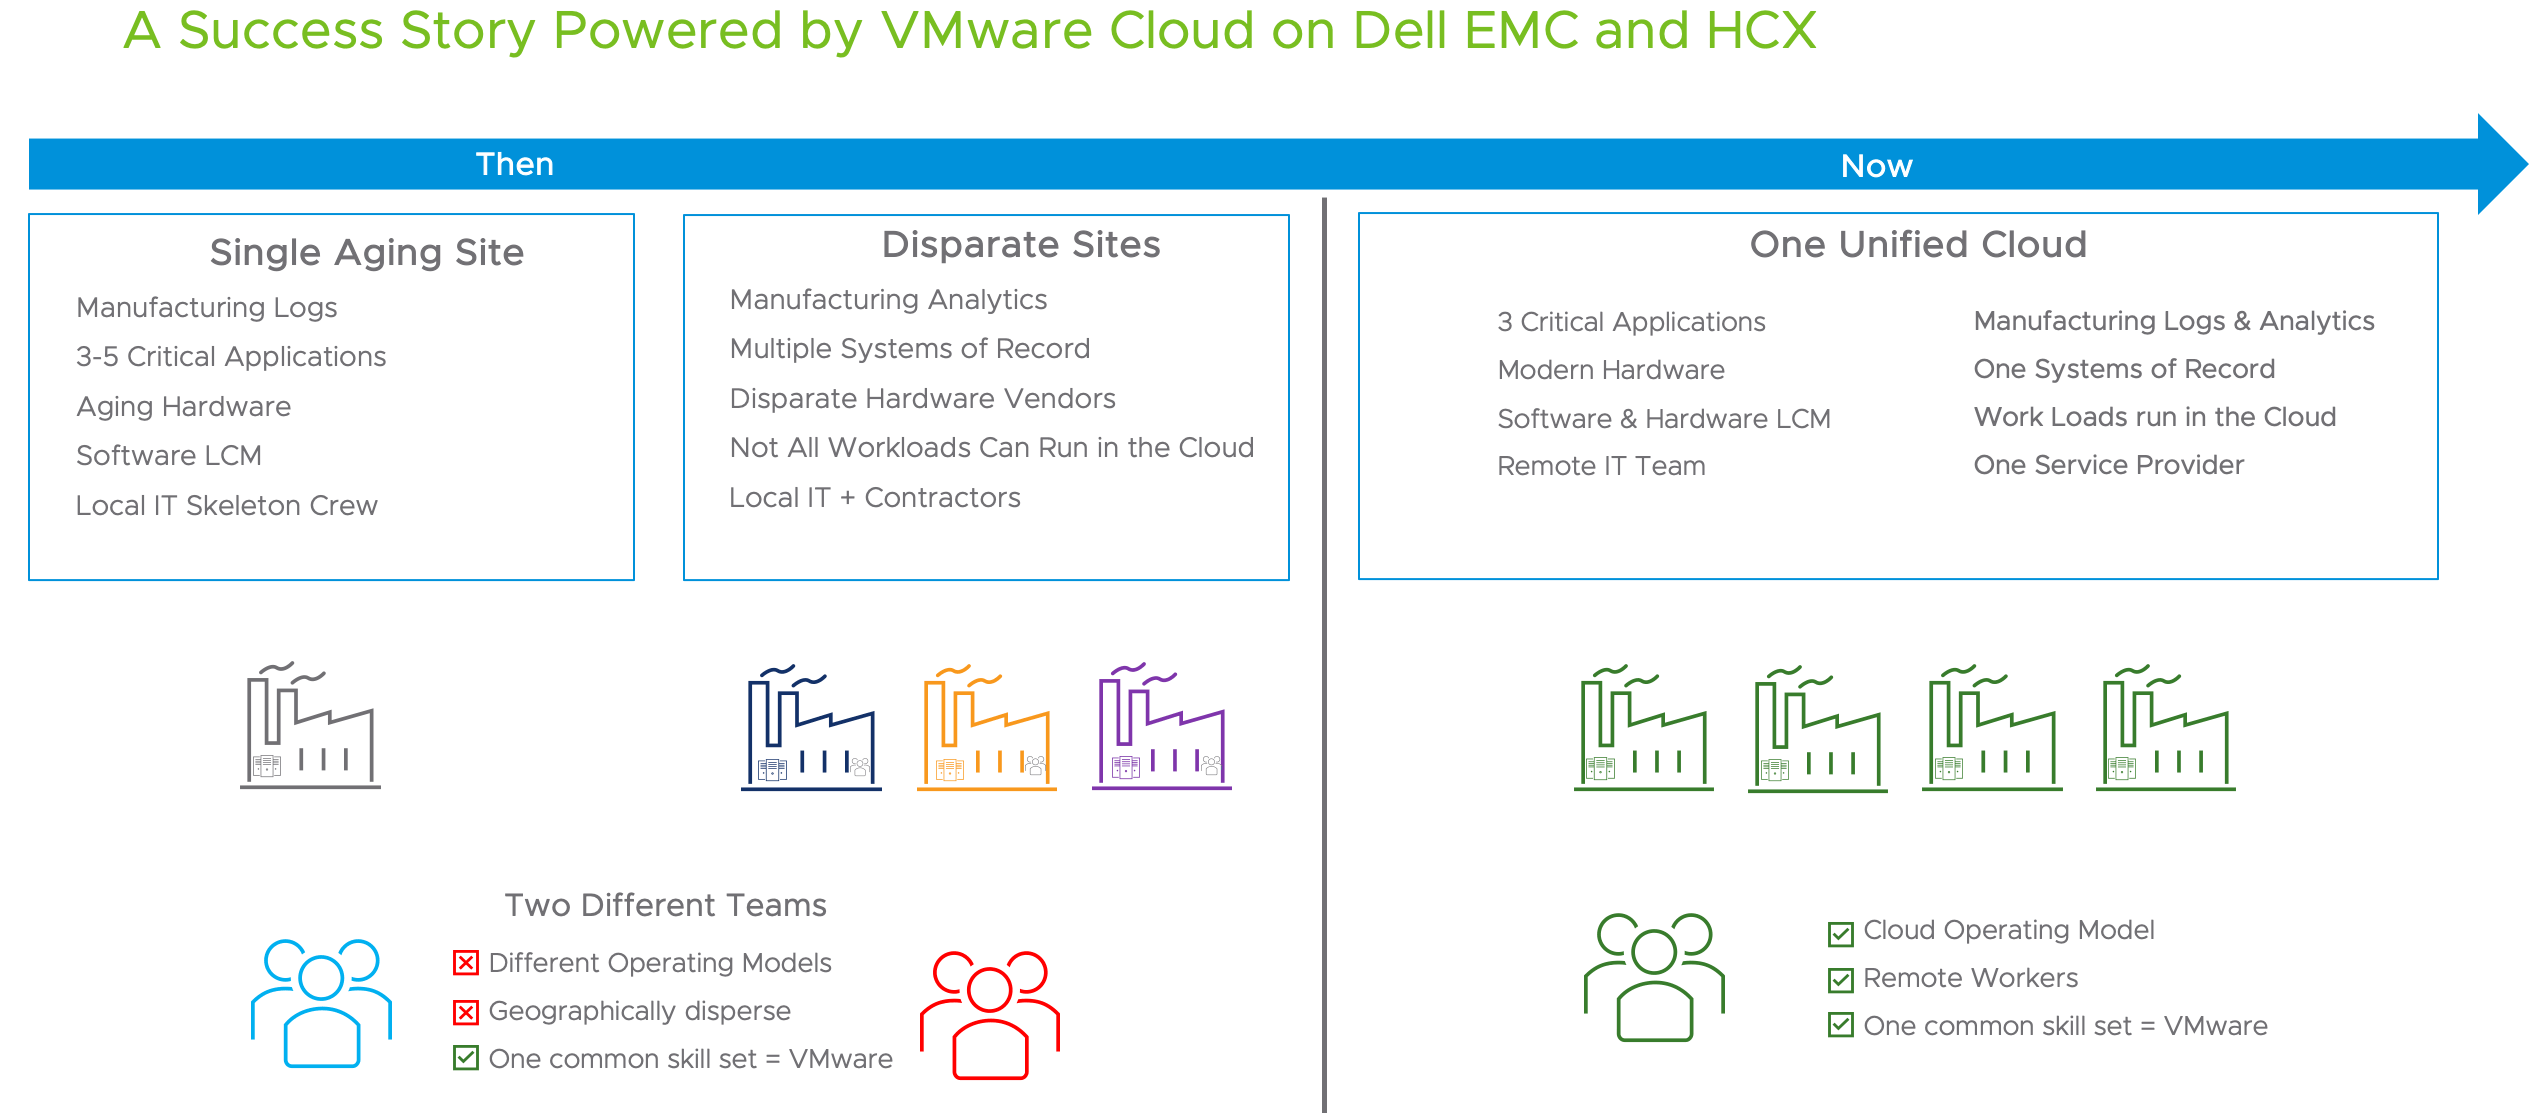 A successful business integration project leveraging VMware Cloud on Dell EMC and HCX Advanced